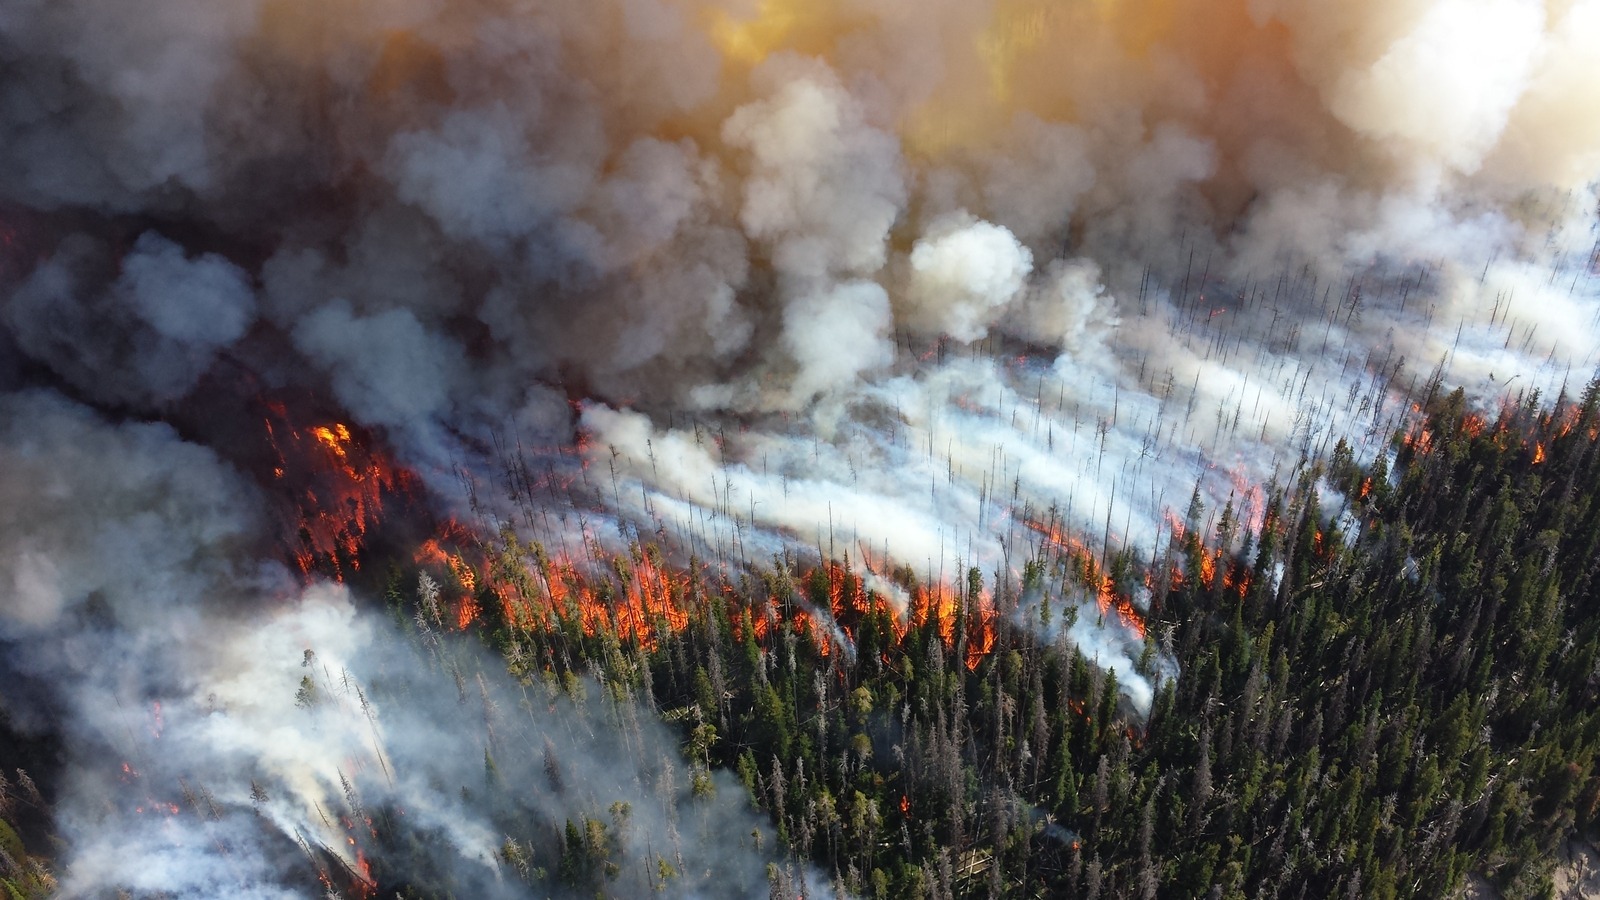 A lightning strike ignited the 2013 Alder Fire, eventually burning 4,240 acres in Yellowstone National Park. Photo by Mike Lewelling/NPS